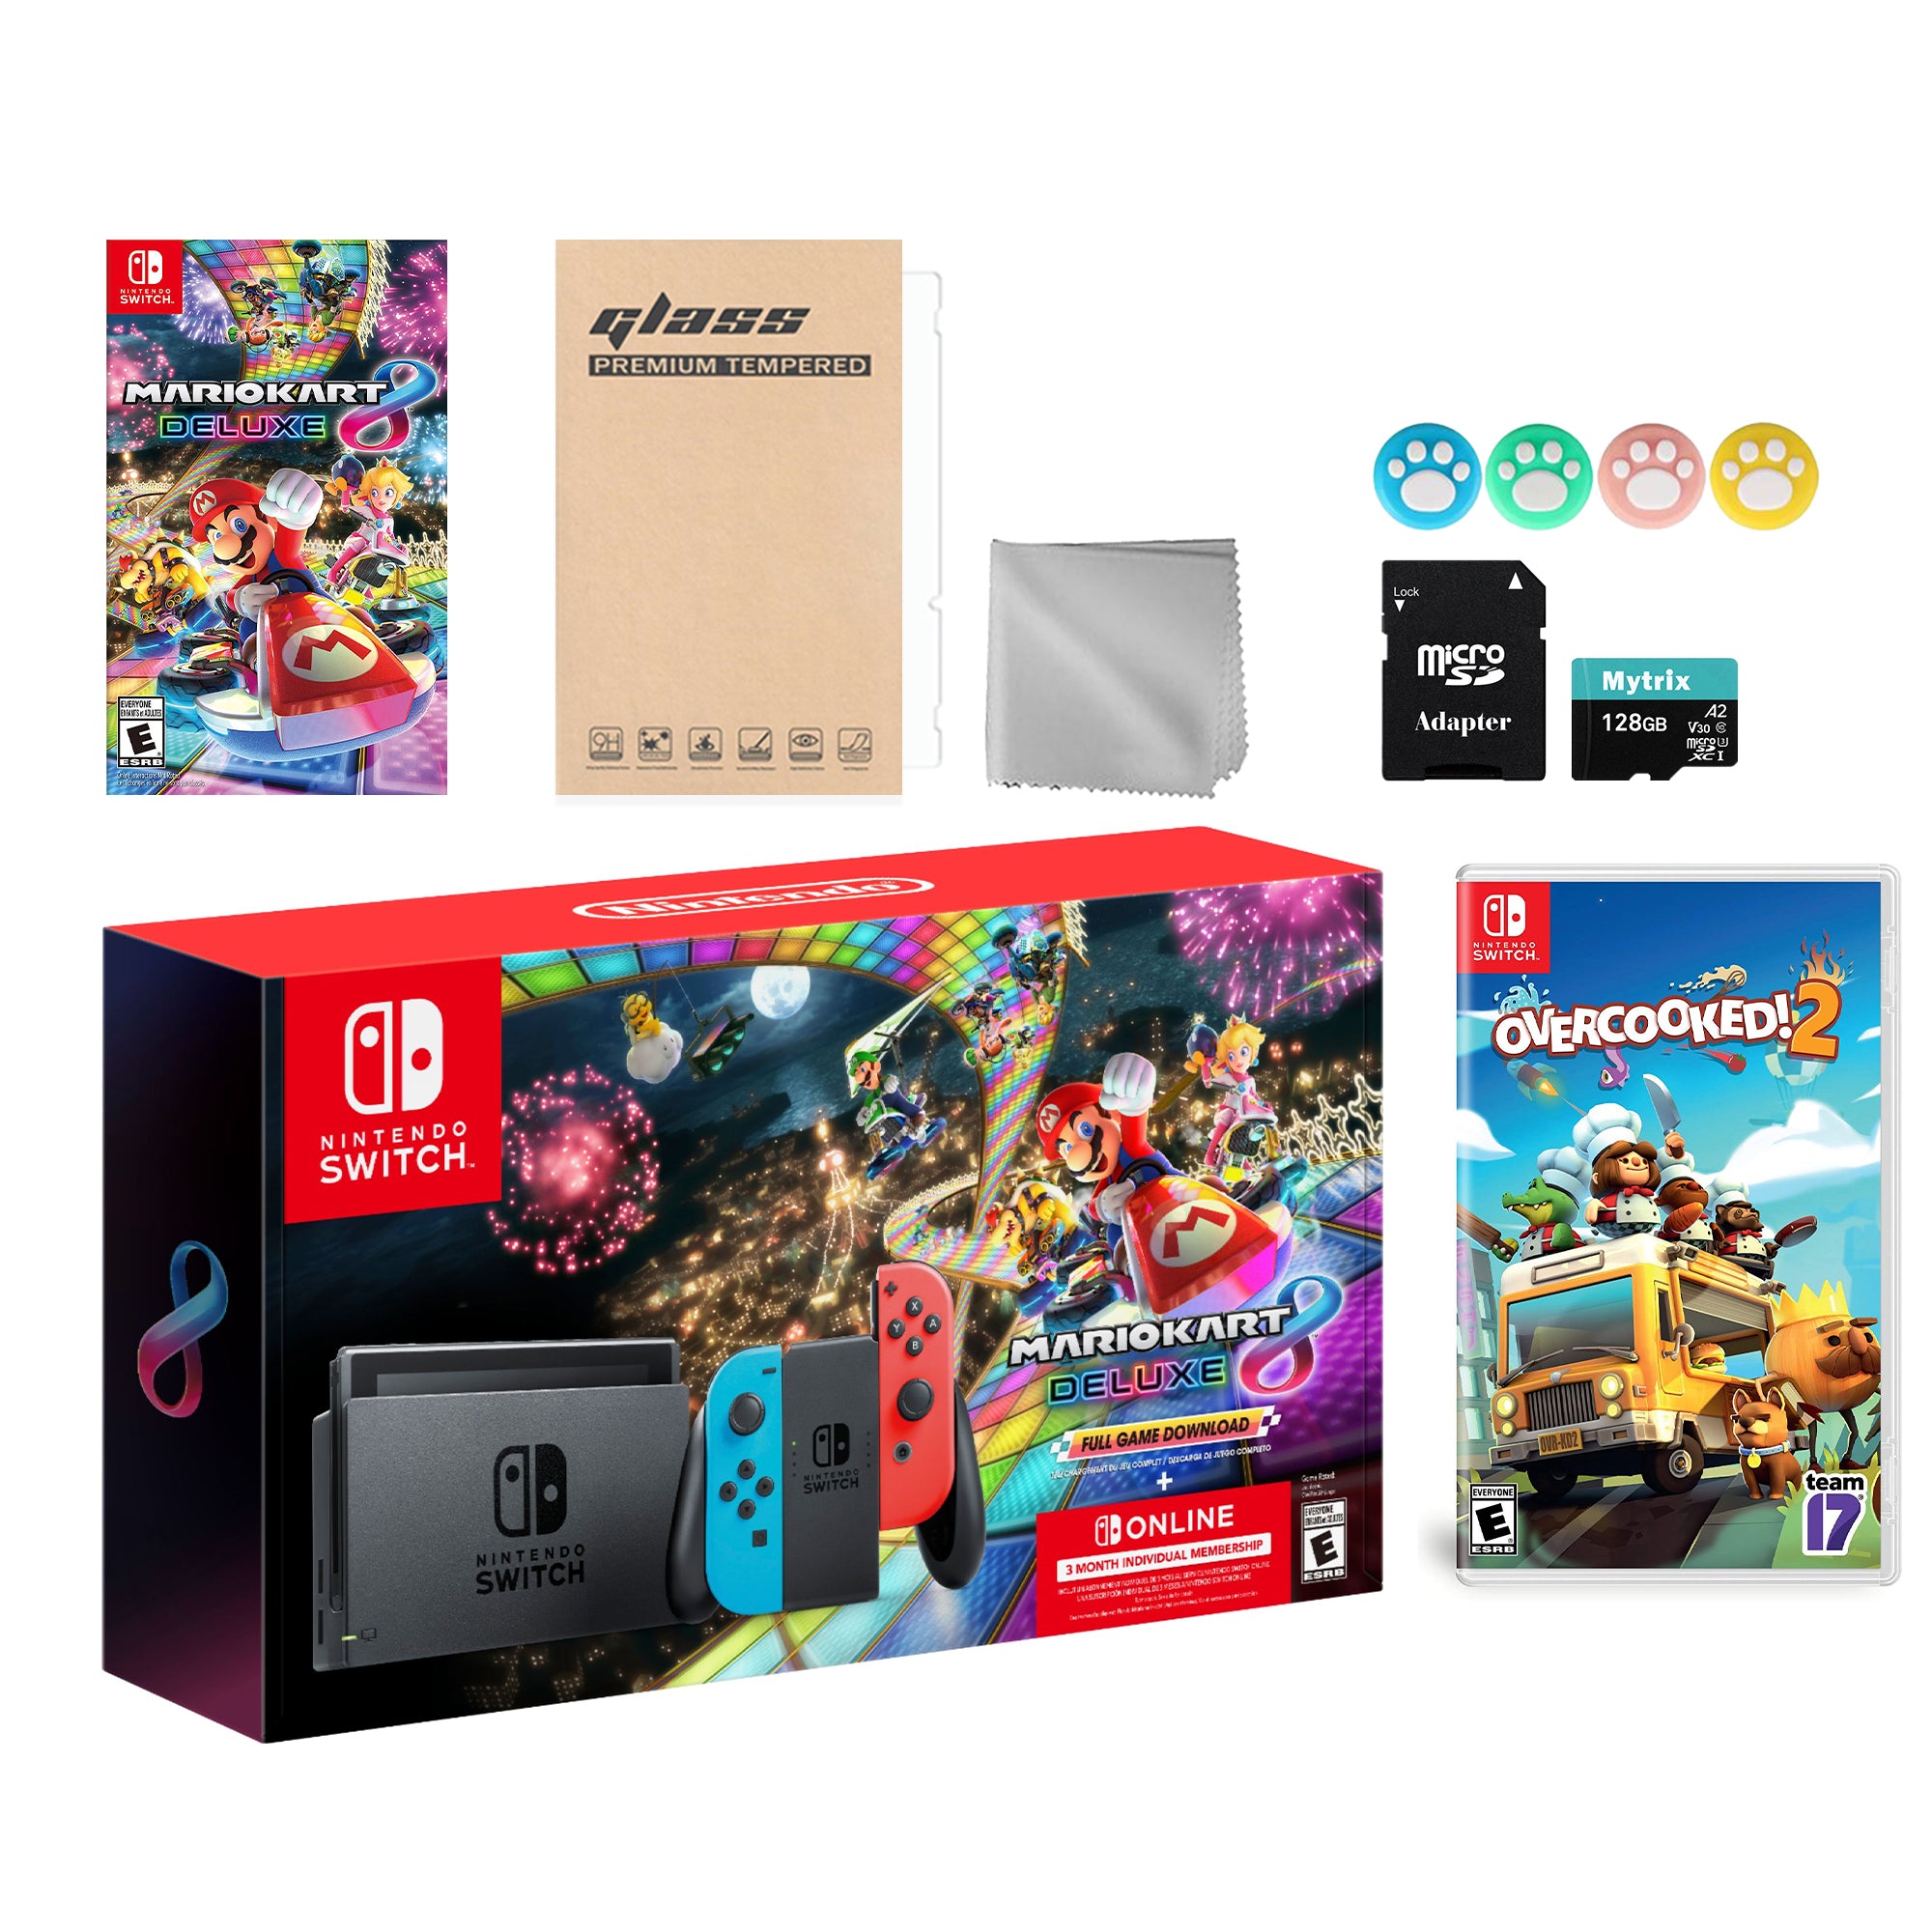 Nintendo Switch Mario Kart 8 Deluxe Bundle: Red Blue Console, Mario Kart 8 & Membership, Overcooked! 2, Mytrix 128GB MicroSD Card and Accessories